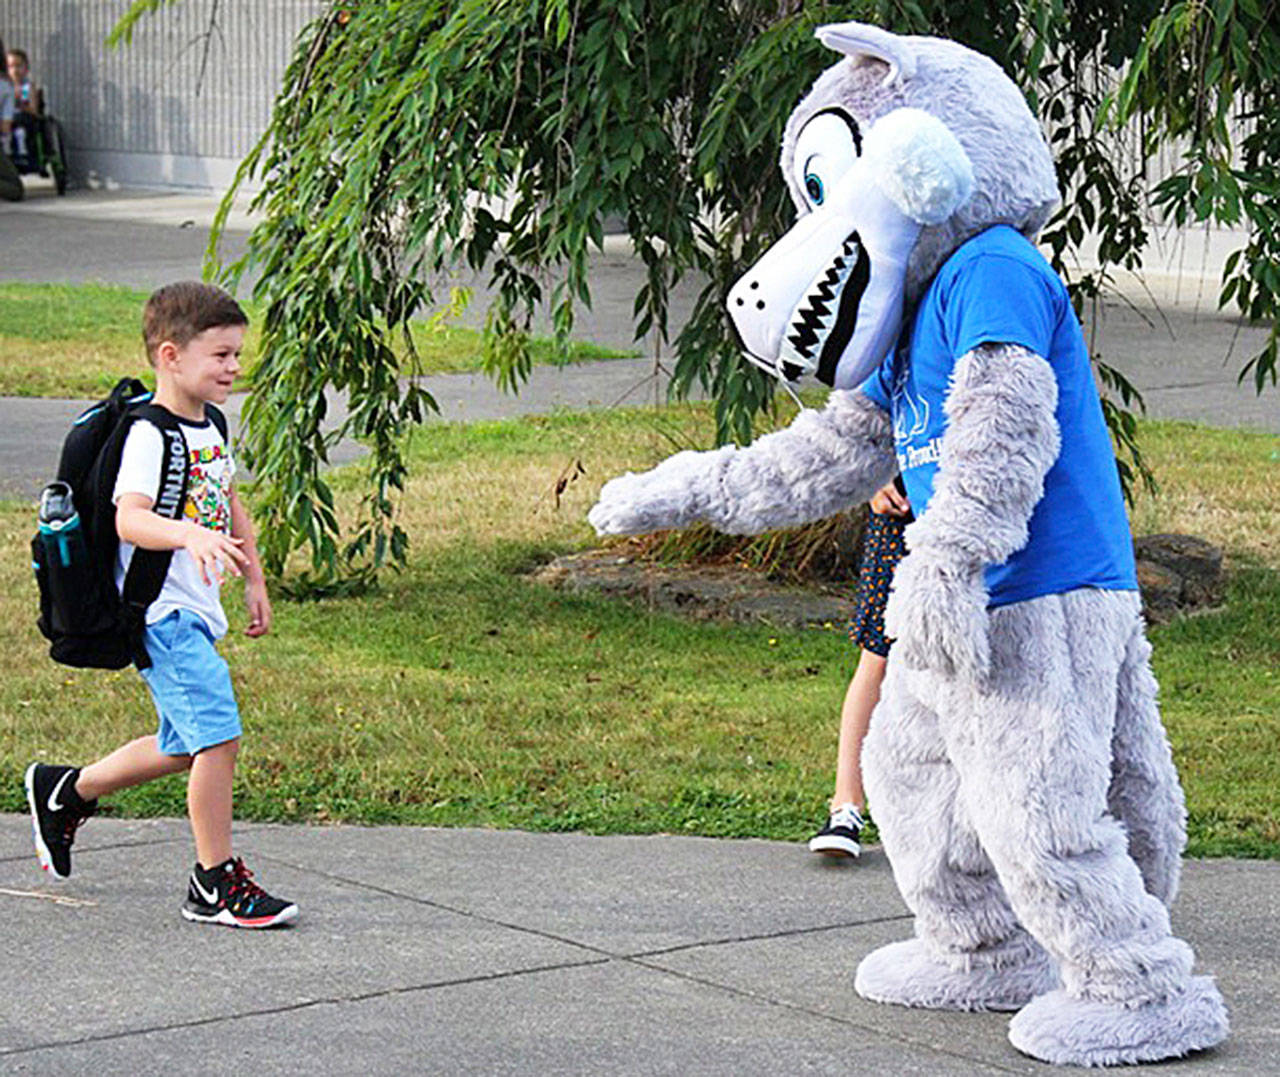 The mascot of the Carriage Crest Elementary School Coyotes greets a student on the first day of school Thursday in the Kent School District. Carriage Crest is in Renton. COURTESY PHOTO, Kent School District